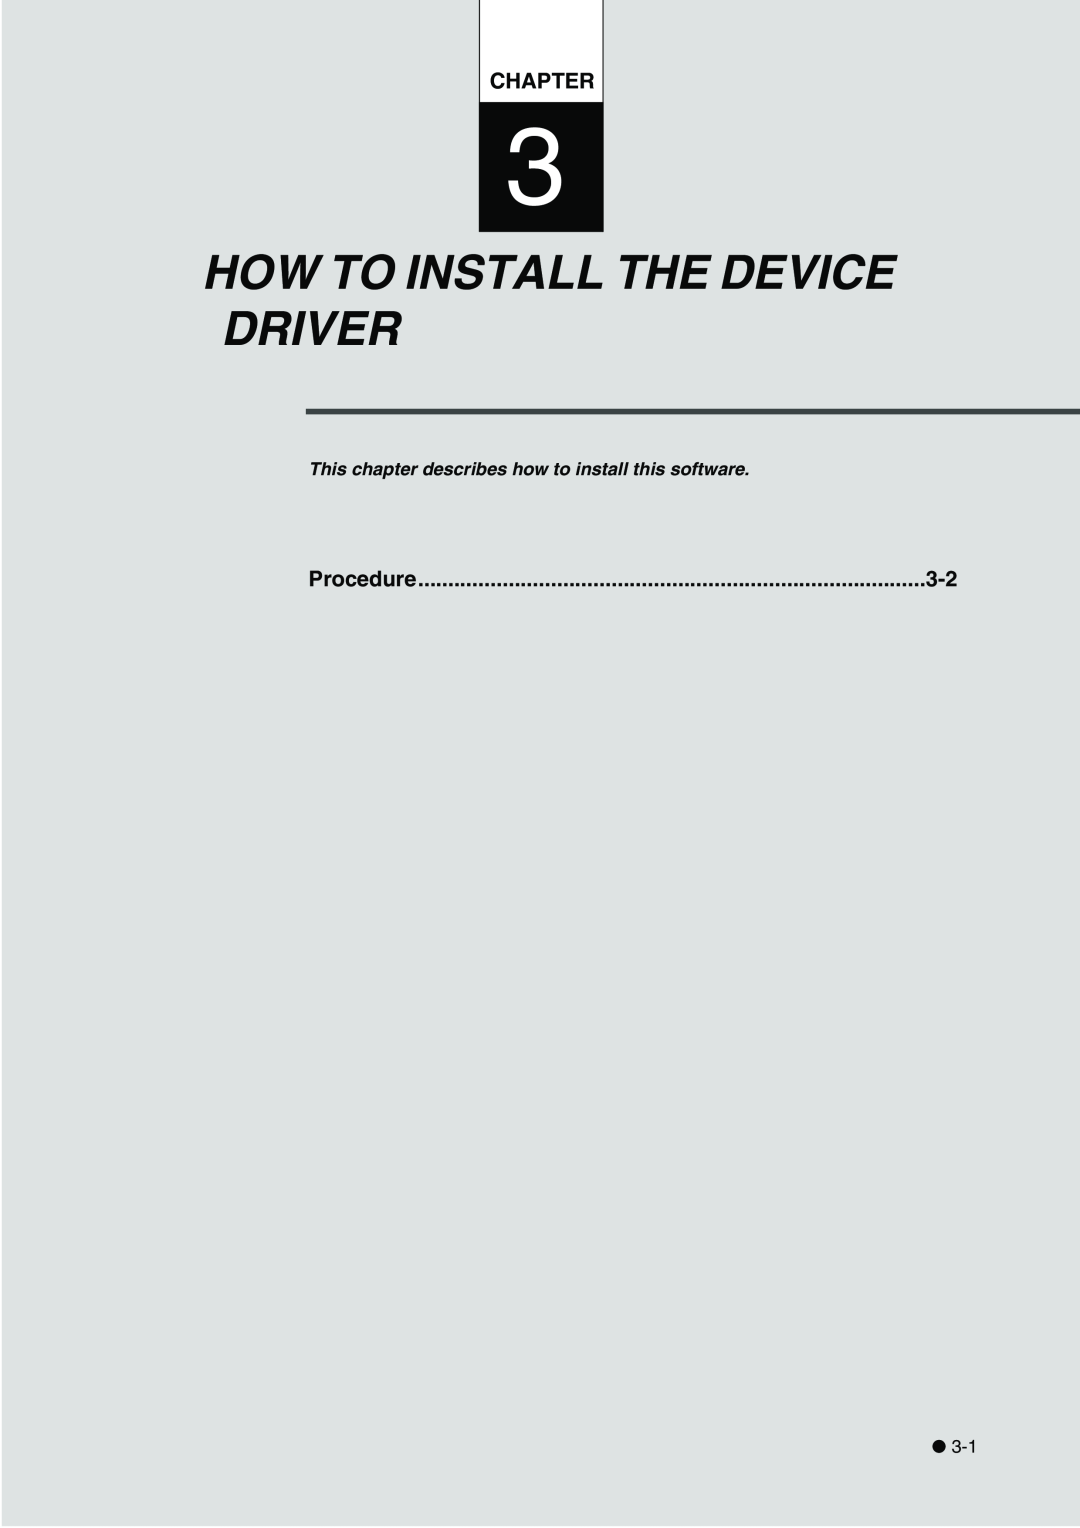 Fujitsu fi-4340C How To Install The Device Driver, Chapter, Procedure, This chapter describes how to install this software 